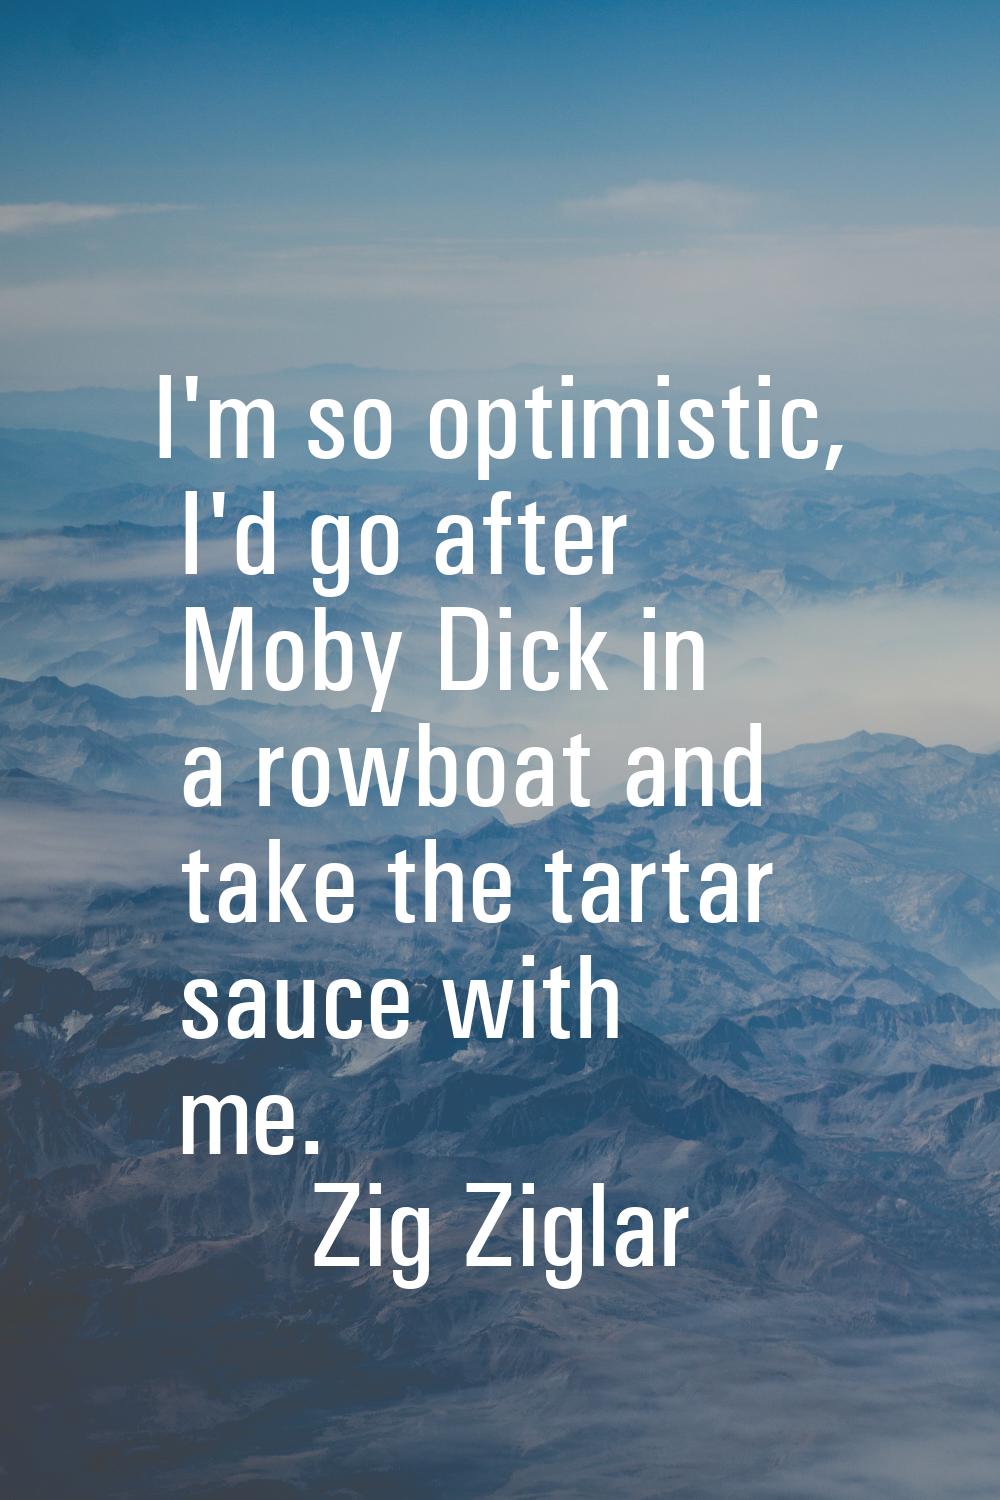 I'm so optimistic, I'd go after Moby Dick in a rowboat and take the tartar sauce with me.